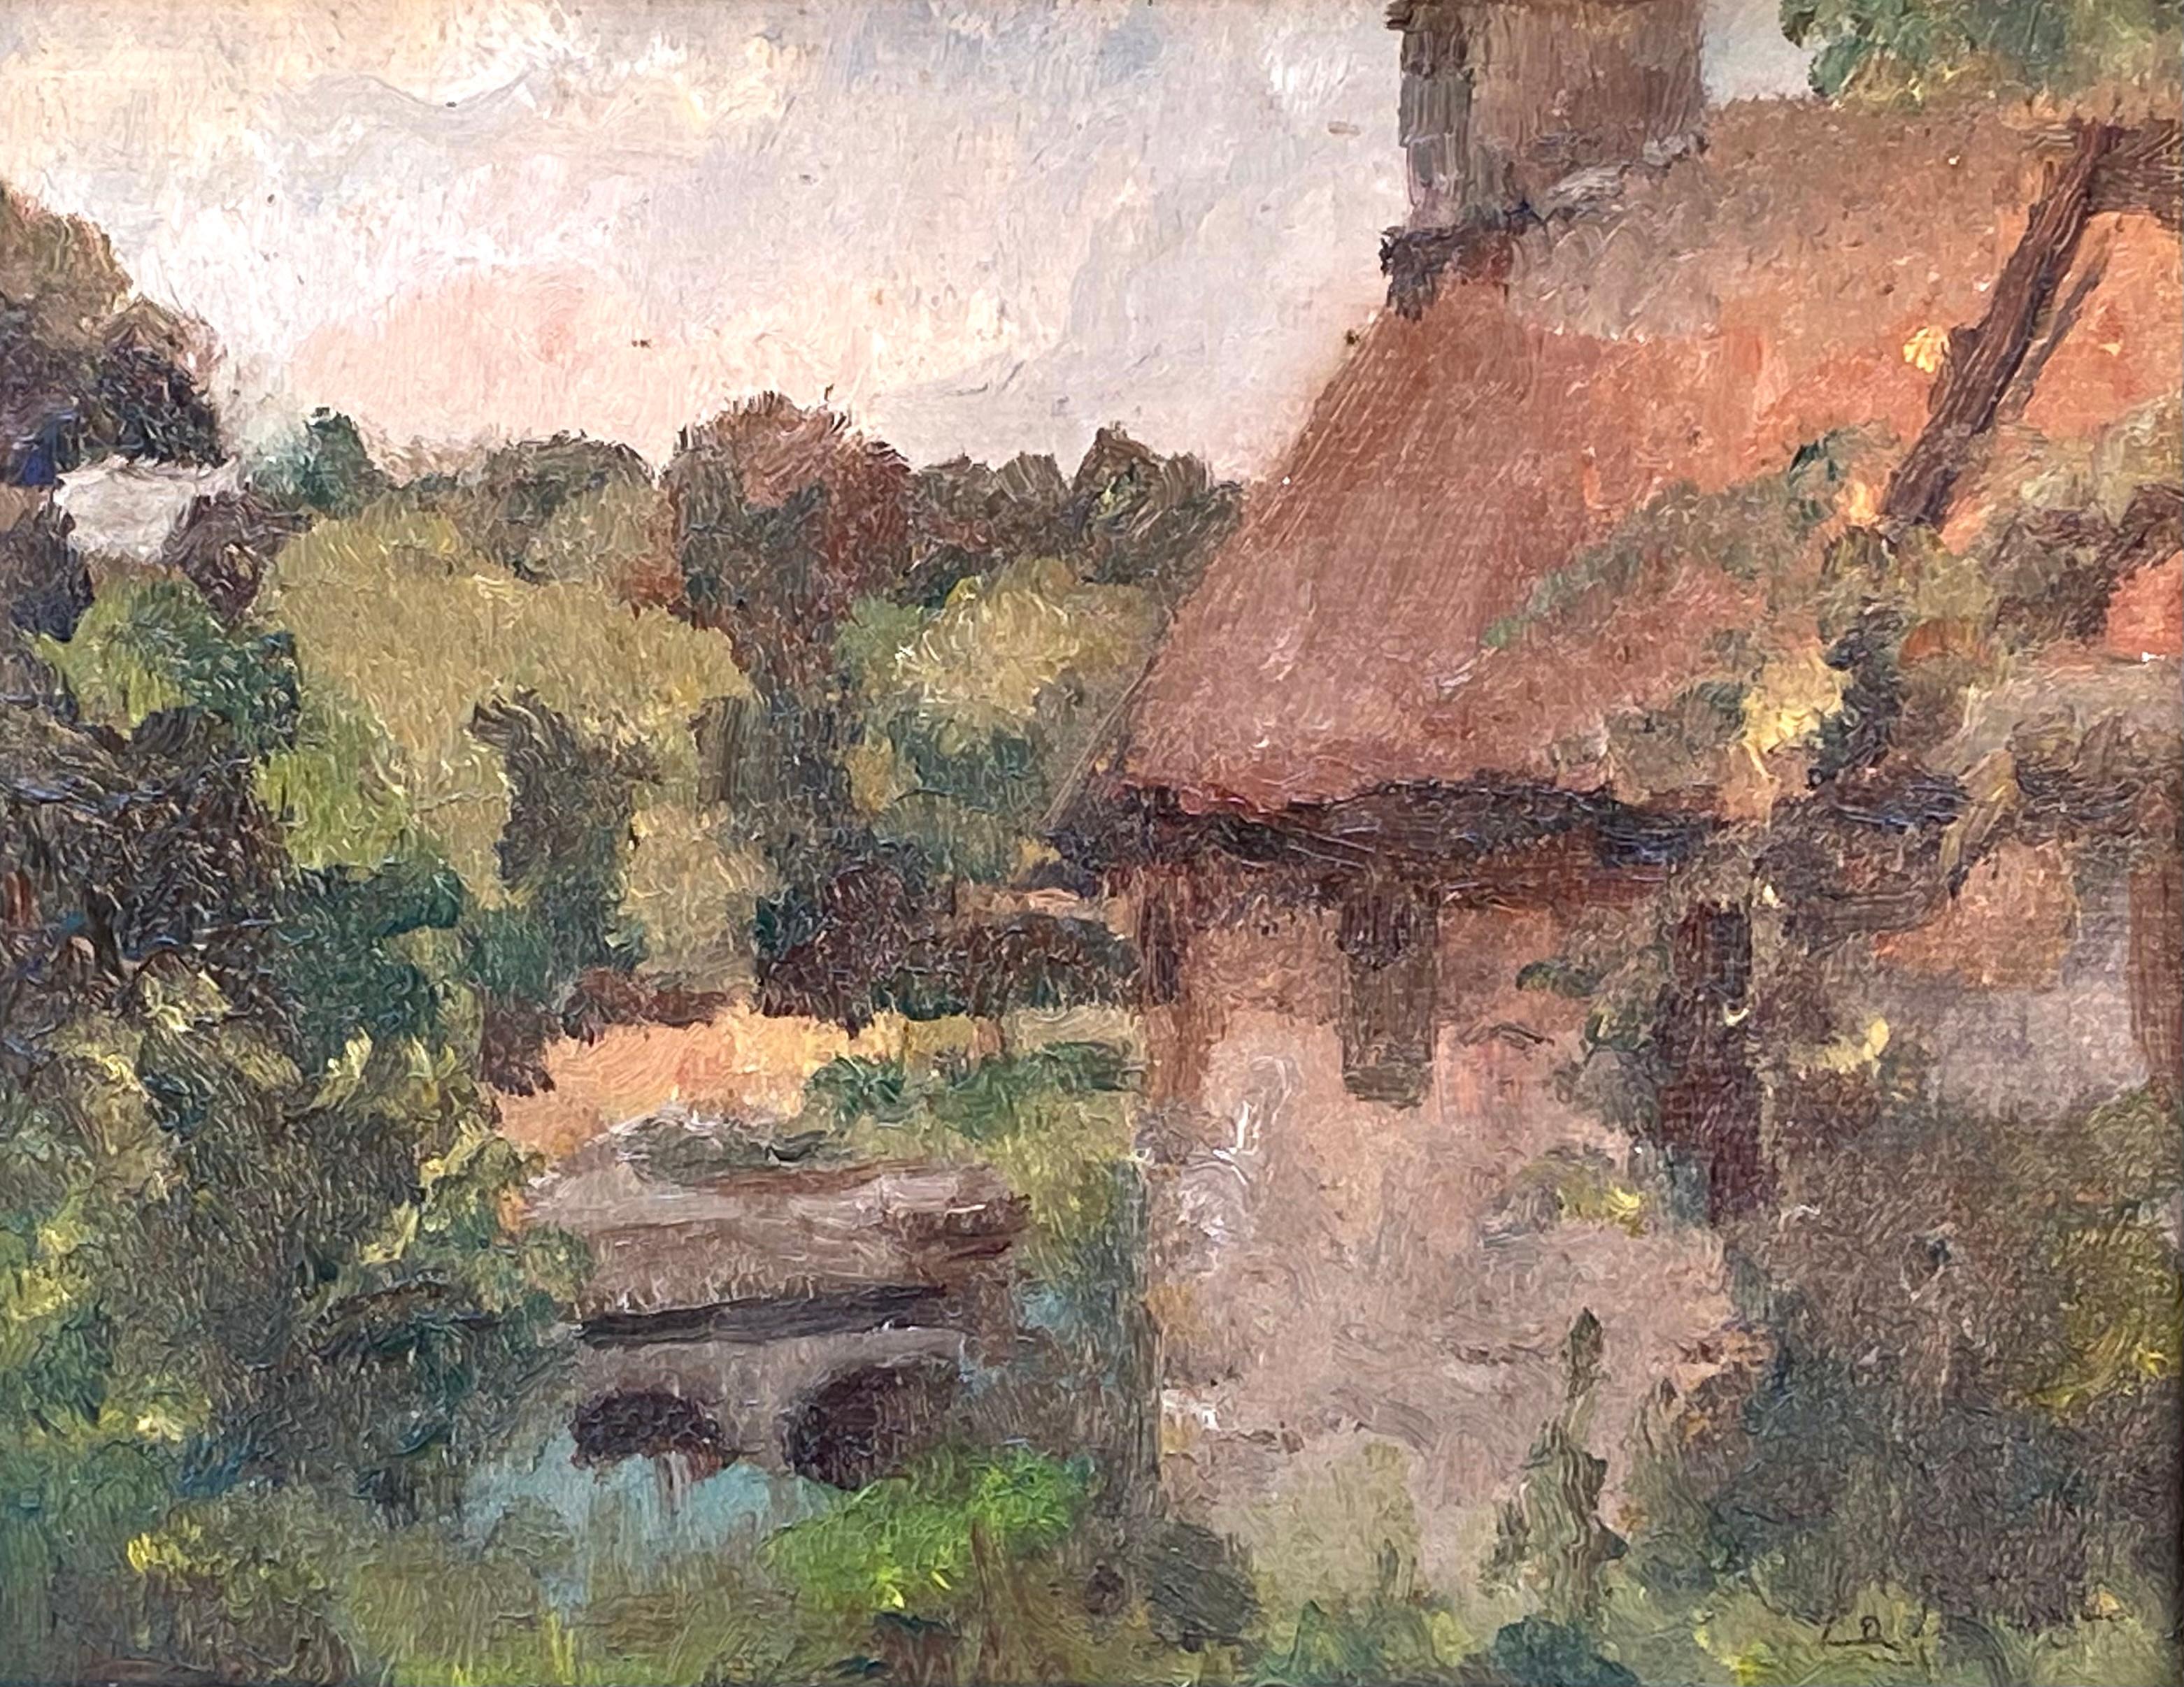 Original oil paint on heavy card stock of a european thatched cottage near a stream by the American impressionist artist, Bird Lefever.  Signed lower right. Condition is very good; no restorations.  Original period gold leaf frame. Overall framed